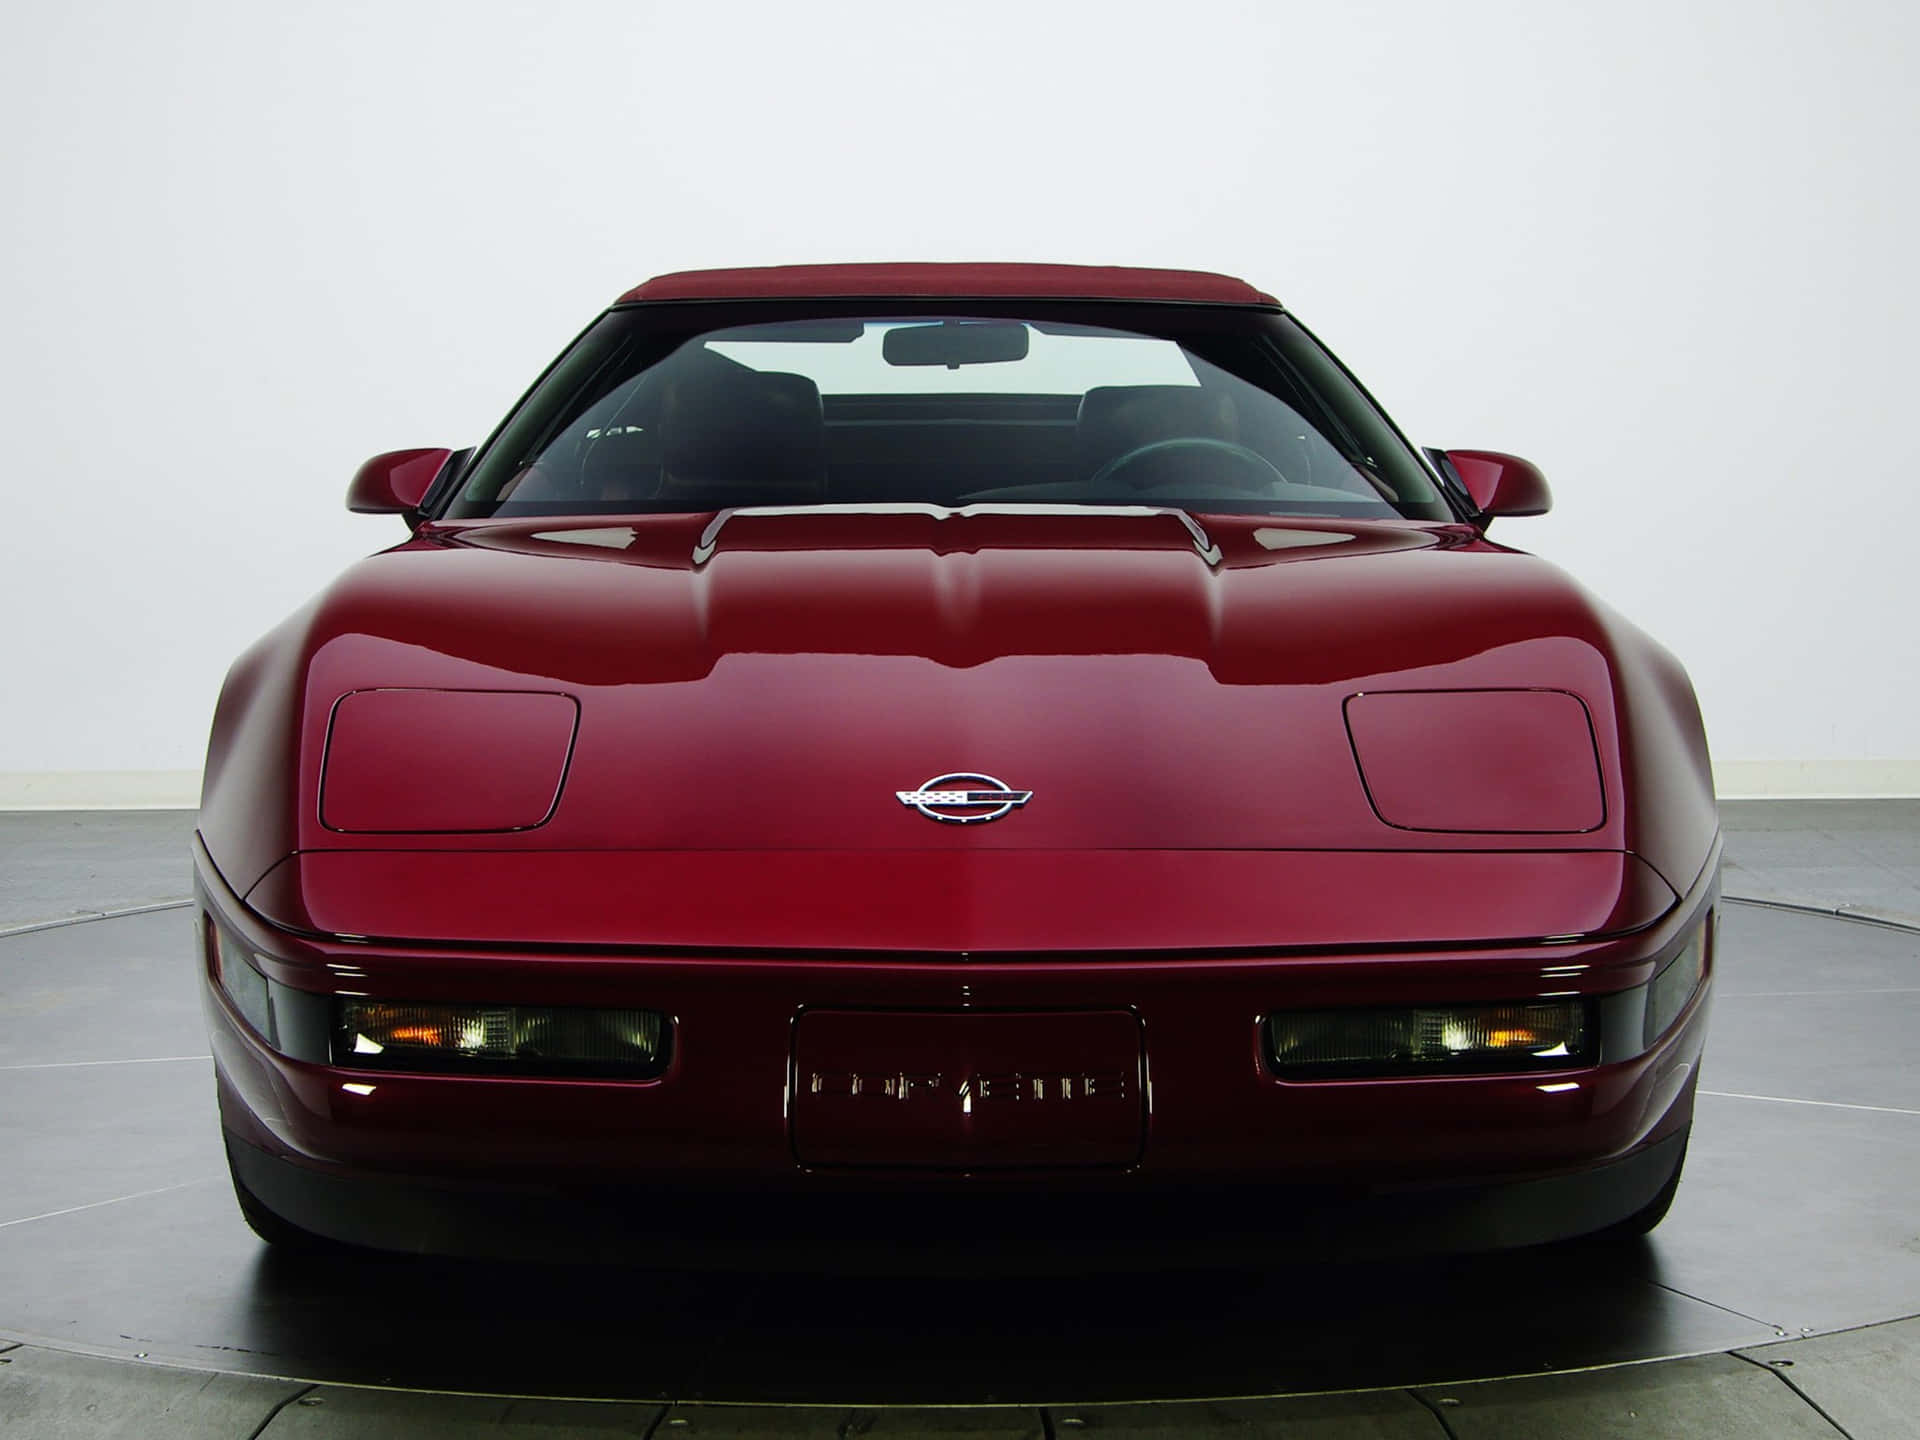 "The Revolutionary C4 Corvette: Engineering Excellence Embodied in Steel and Paint"